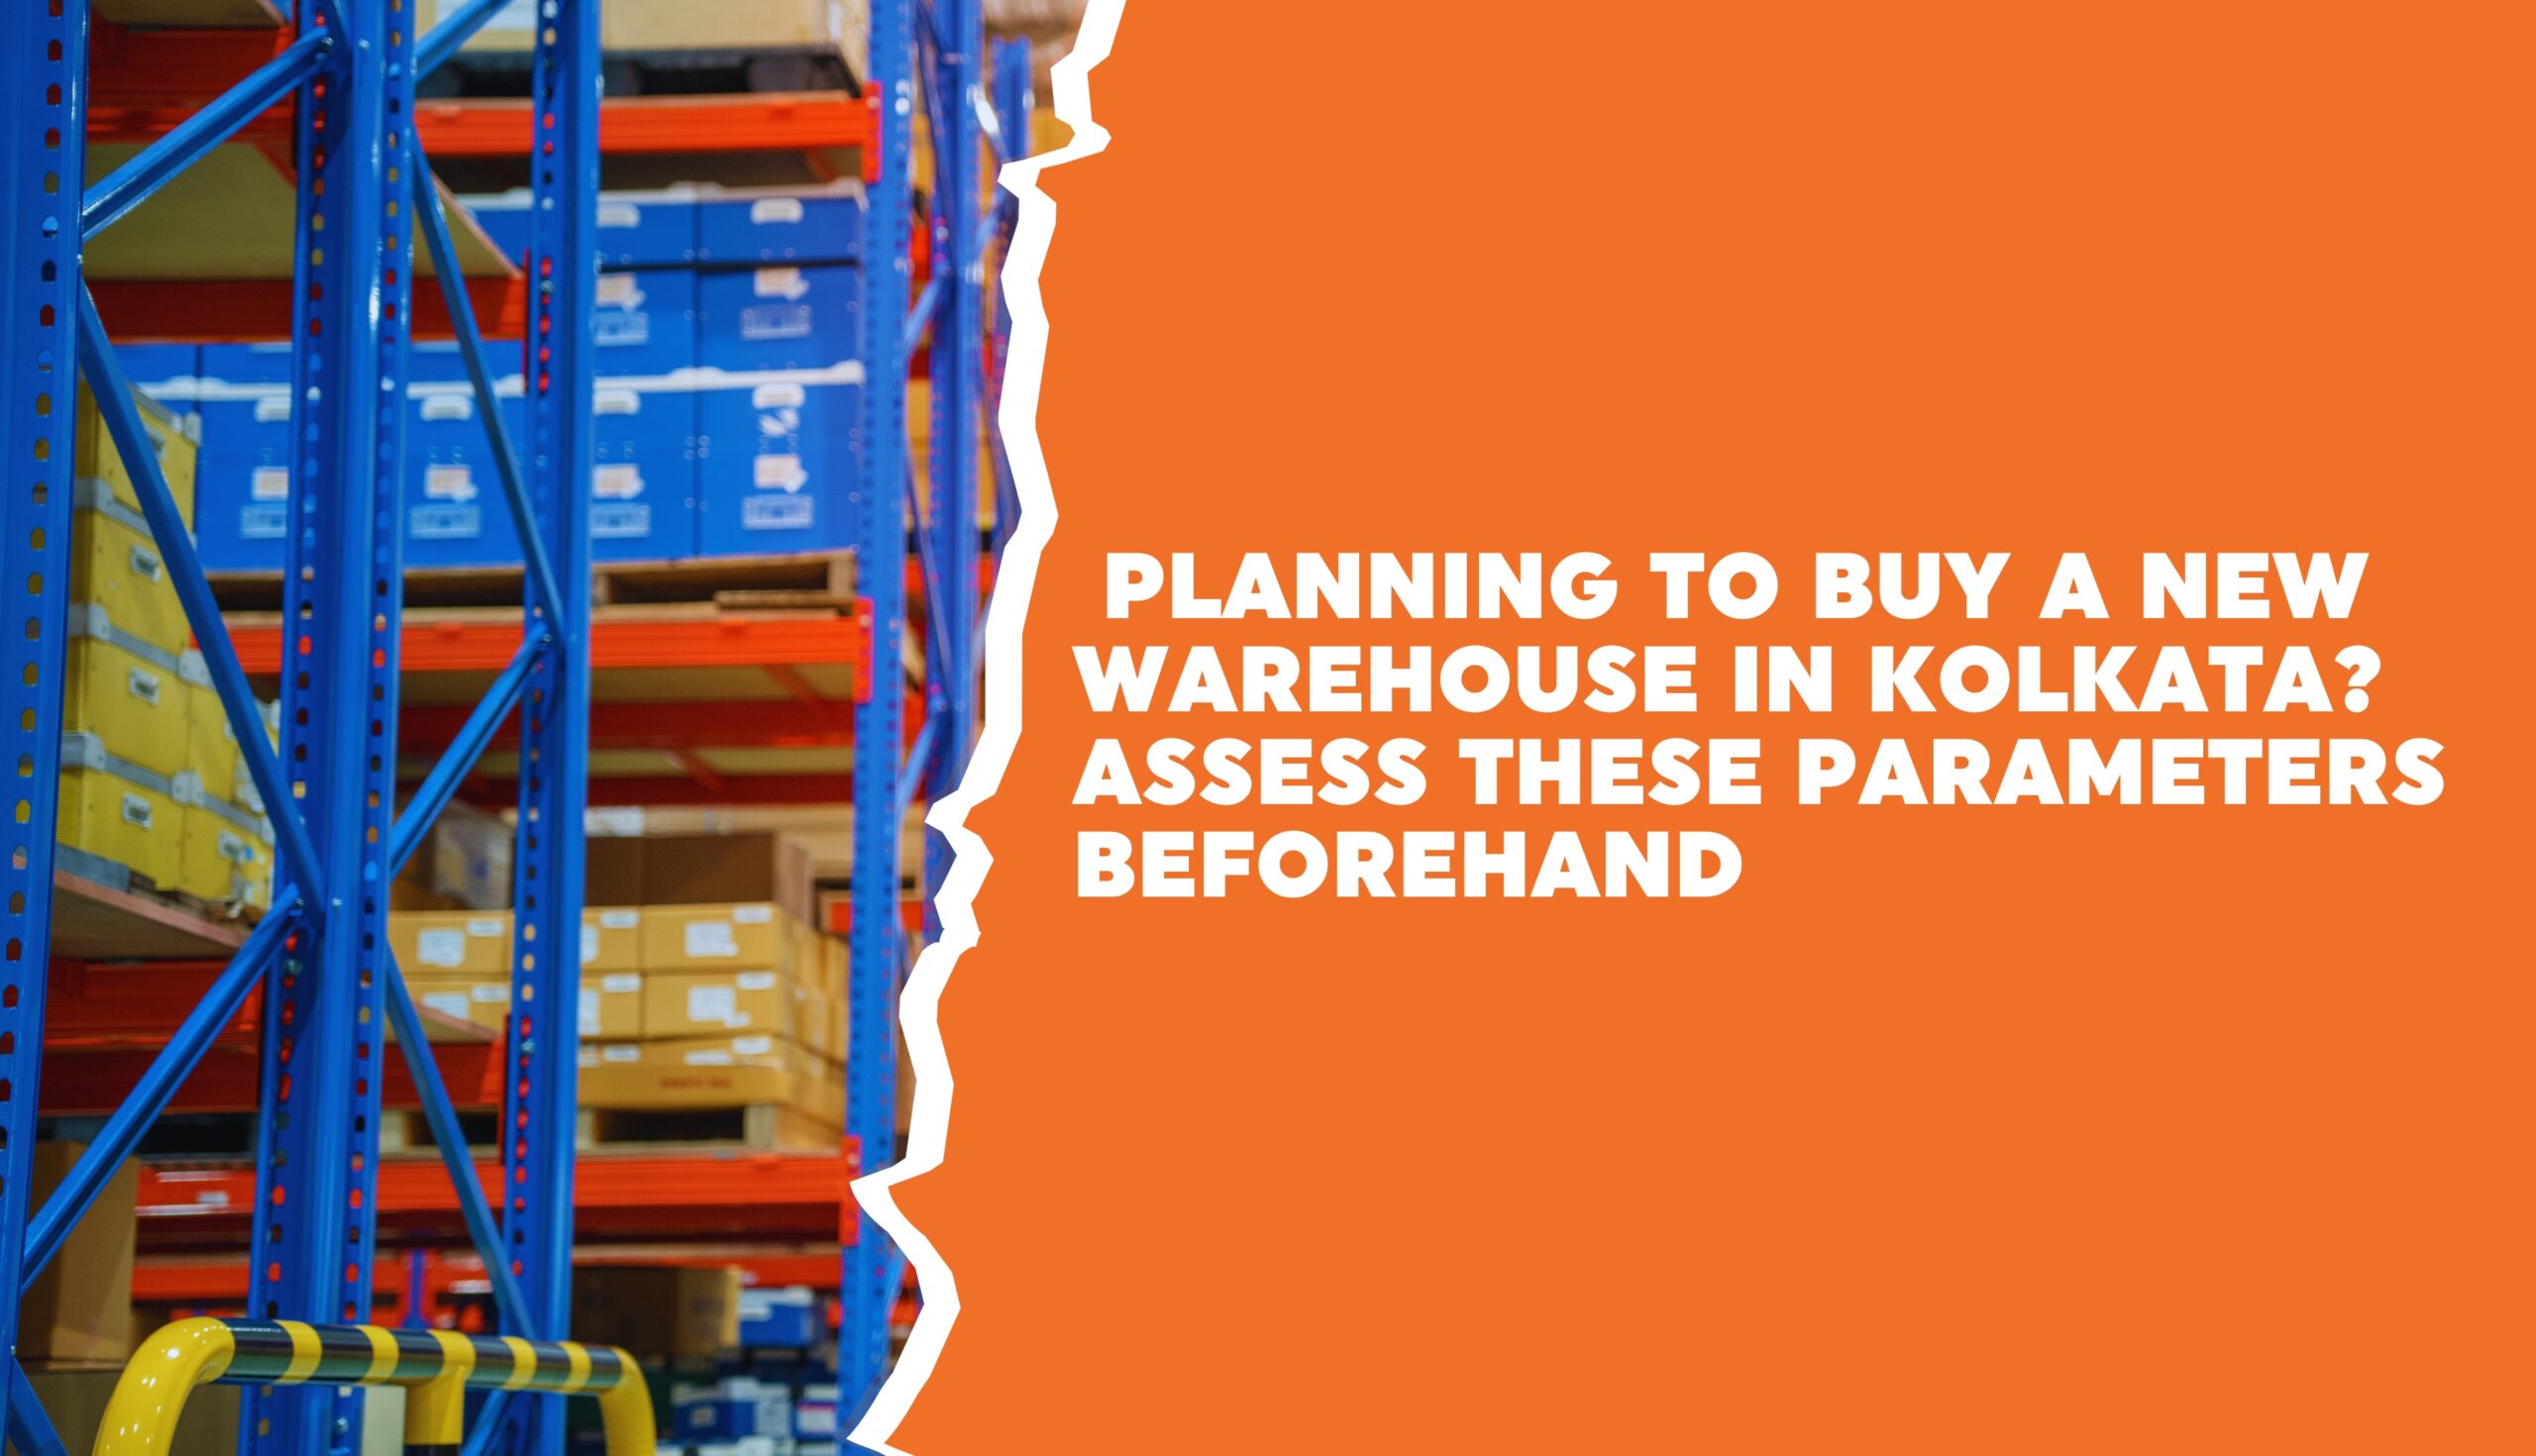 Planning to Buy a New Warehouse in Kolkata? Assess These Parameters Beforehand